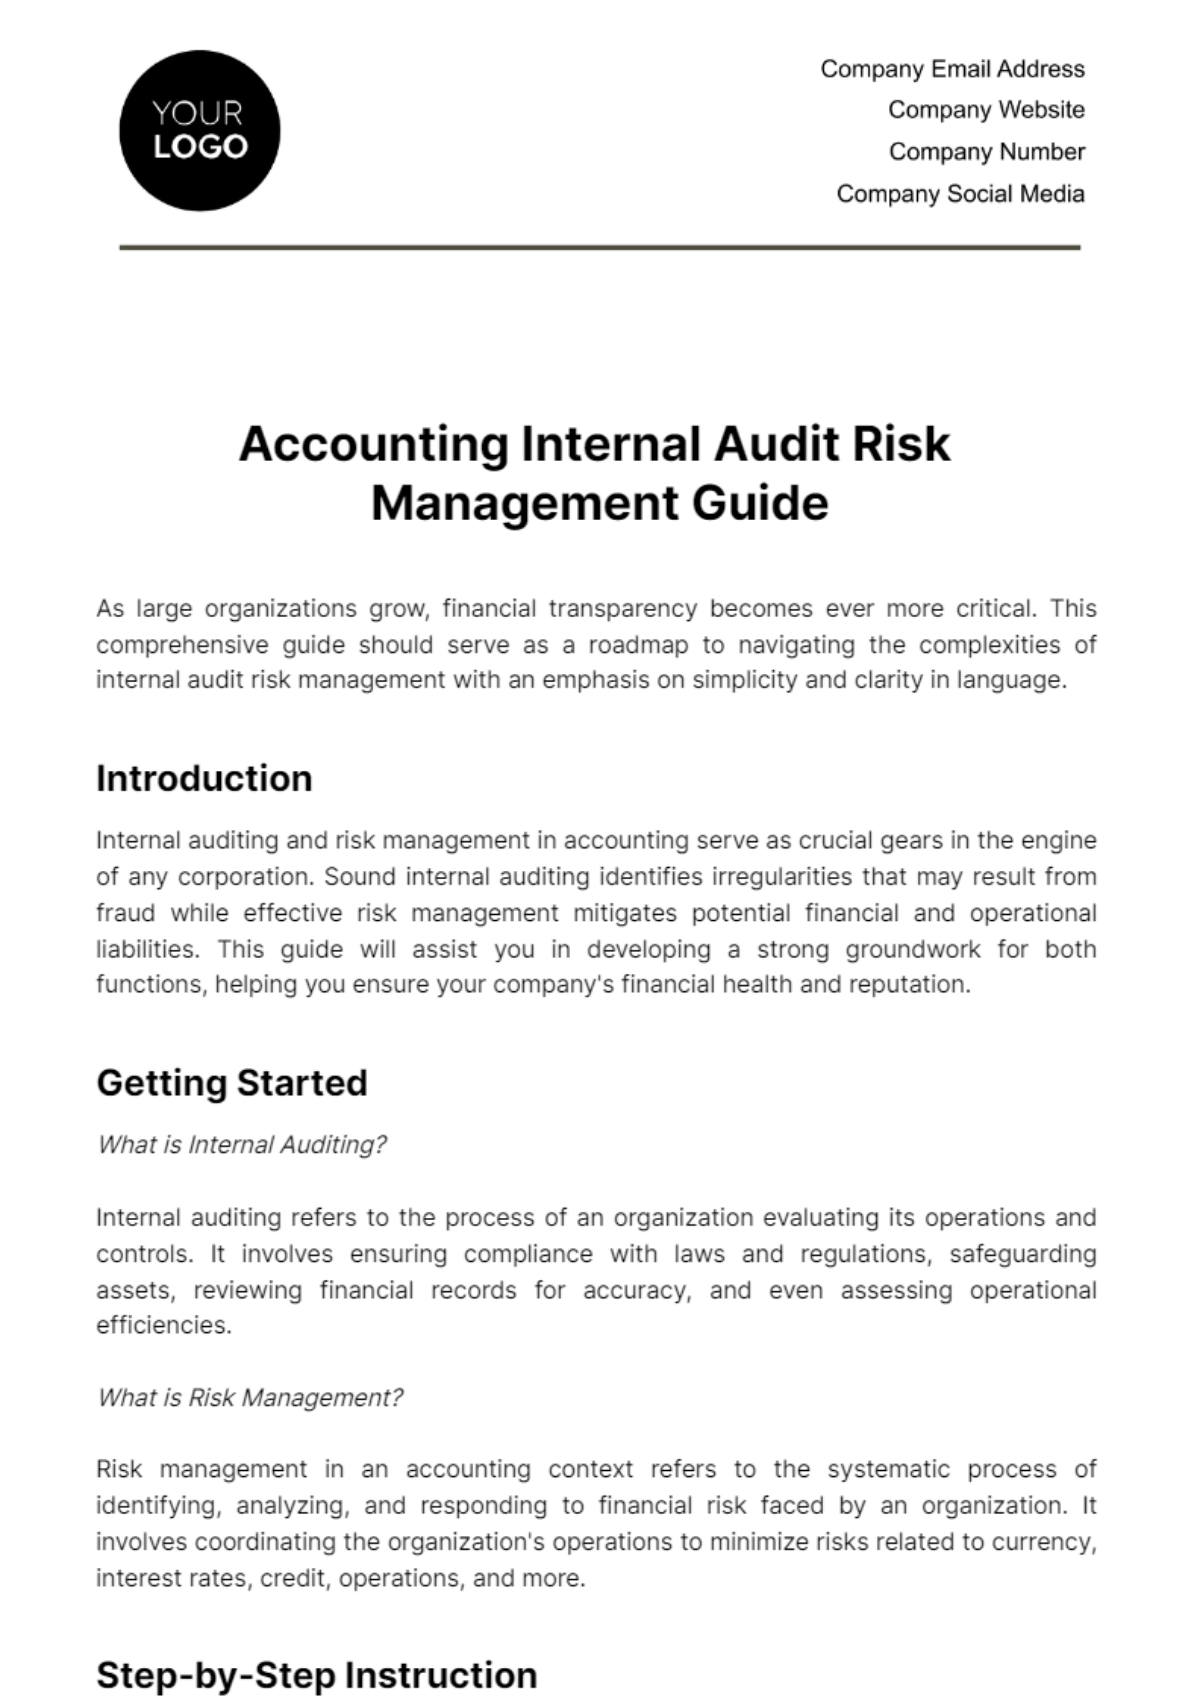 Accounting Internal Audit Risk Management Guide Template